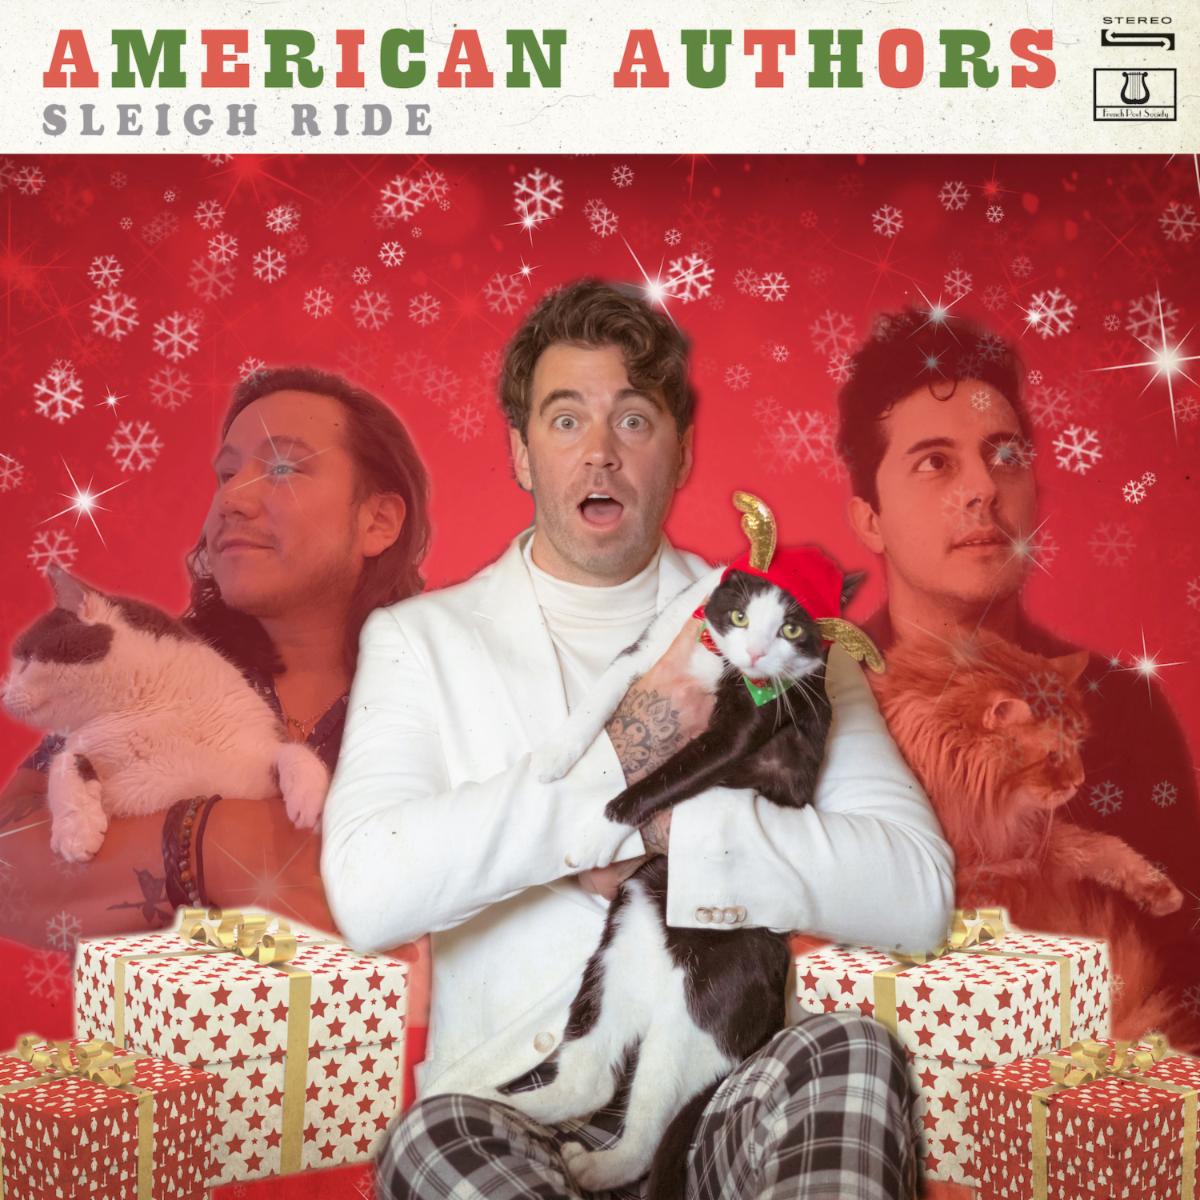 American Authors Celebrates The Season With “Sleigh Ride”